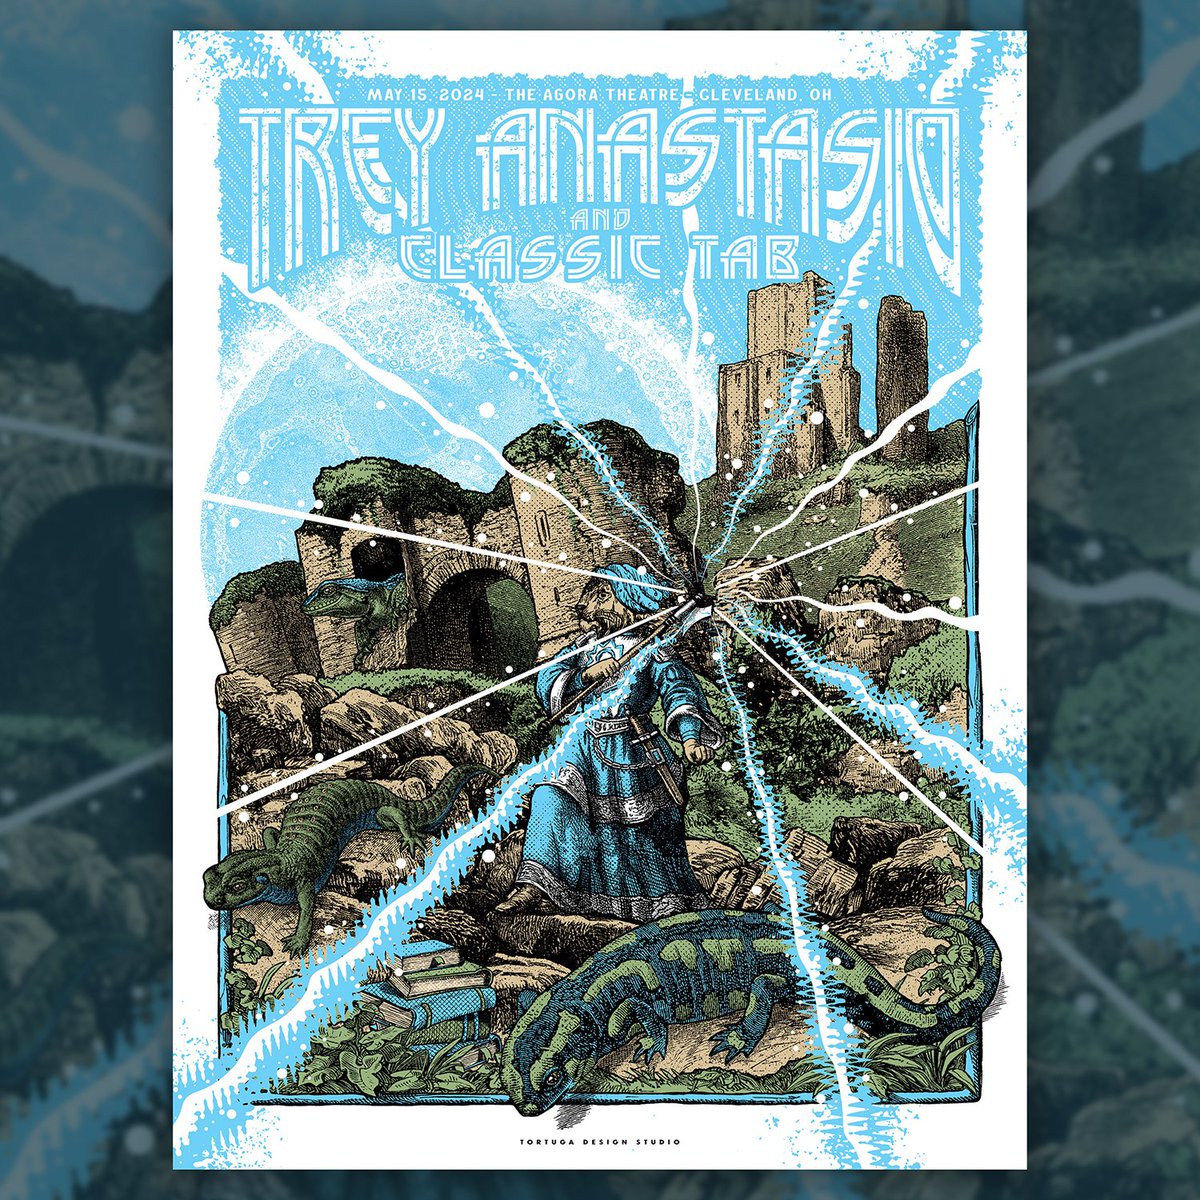 Trey Anastasio and Classic TAB plays tonight in Cleveland, OH. The show poster is by Tortuga Design Studio. There will also be a limited foil edition available.